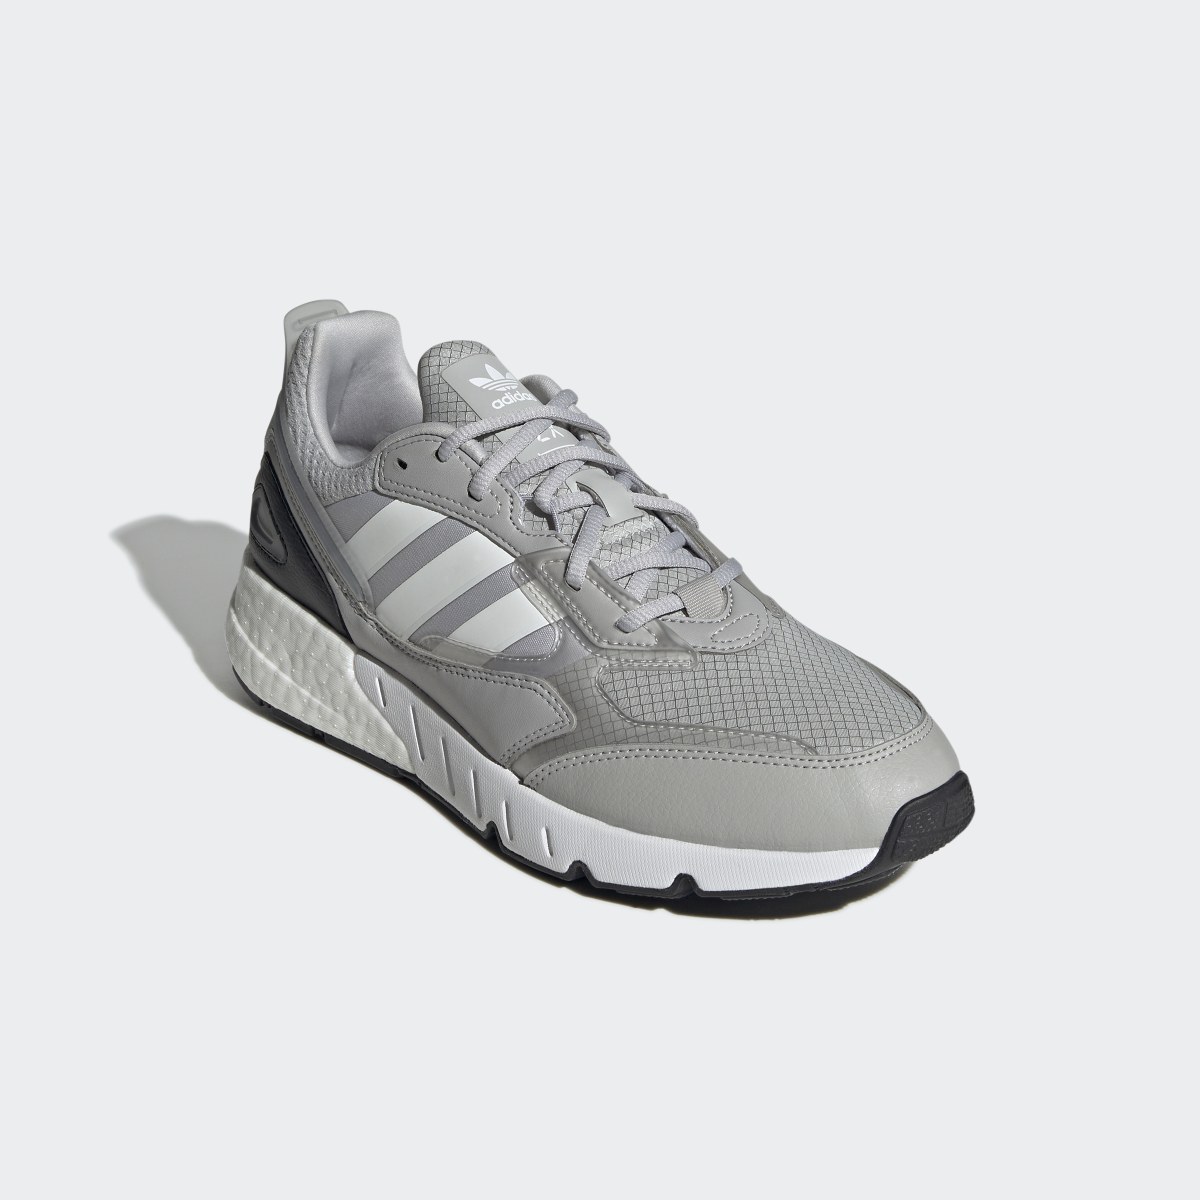 Adidas ZX 1K Boost 2.0 Shoes. 5